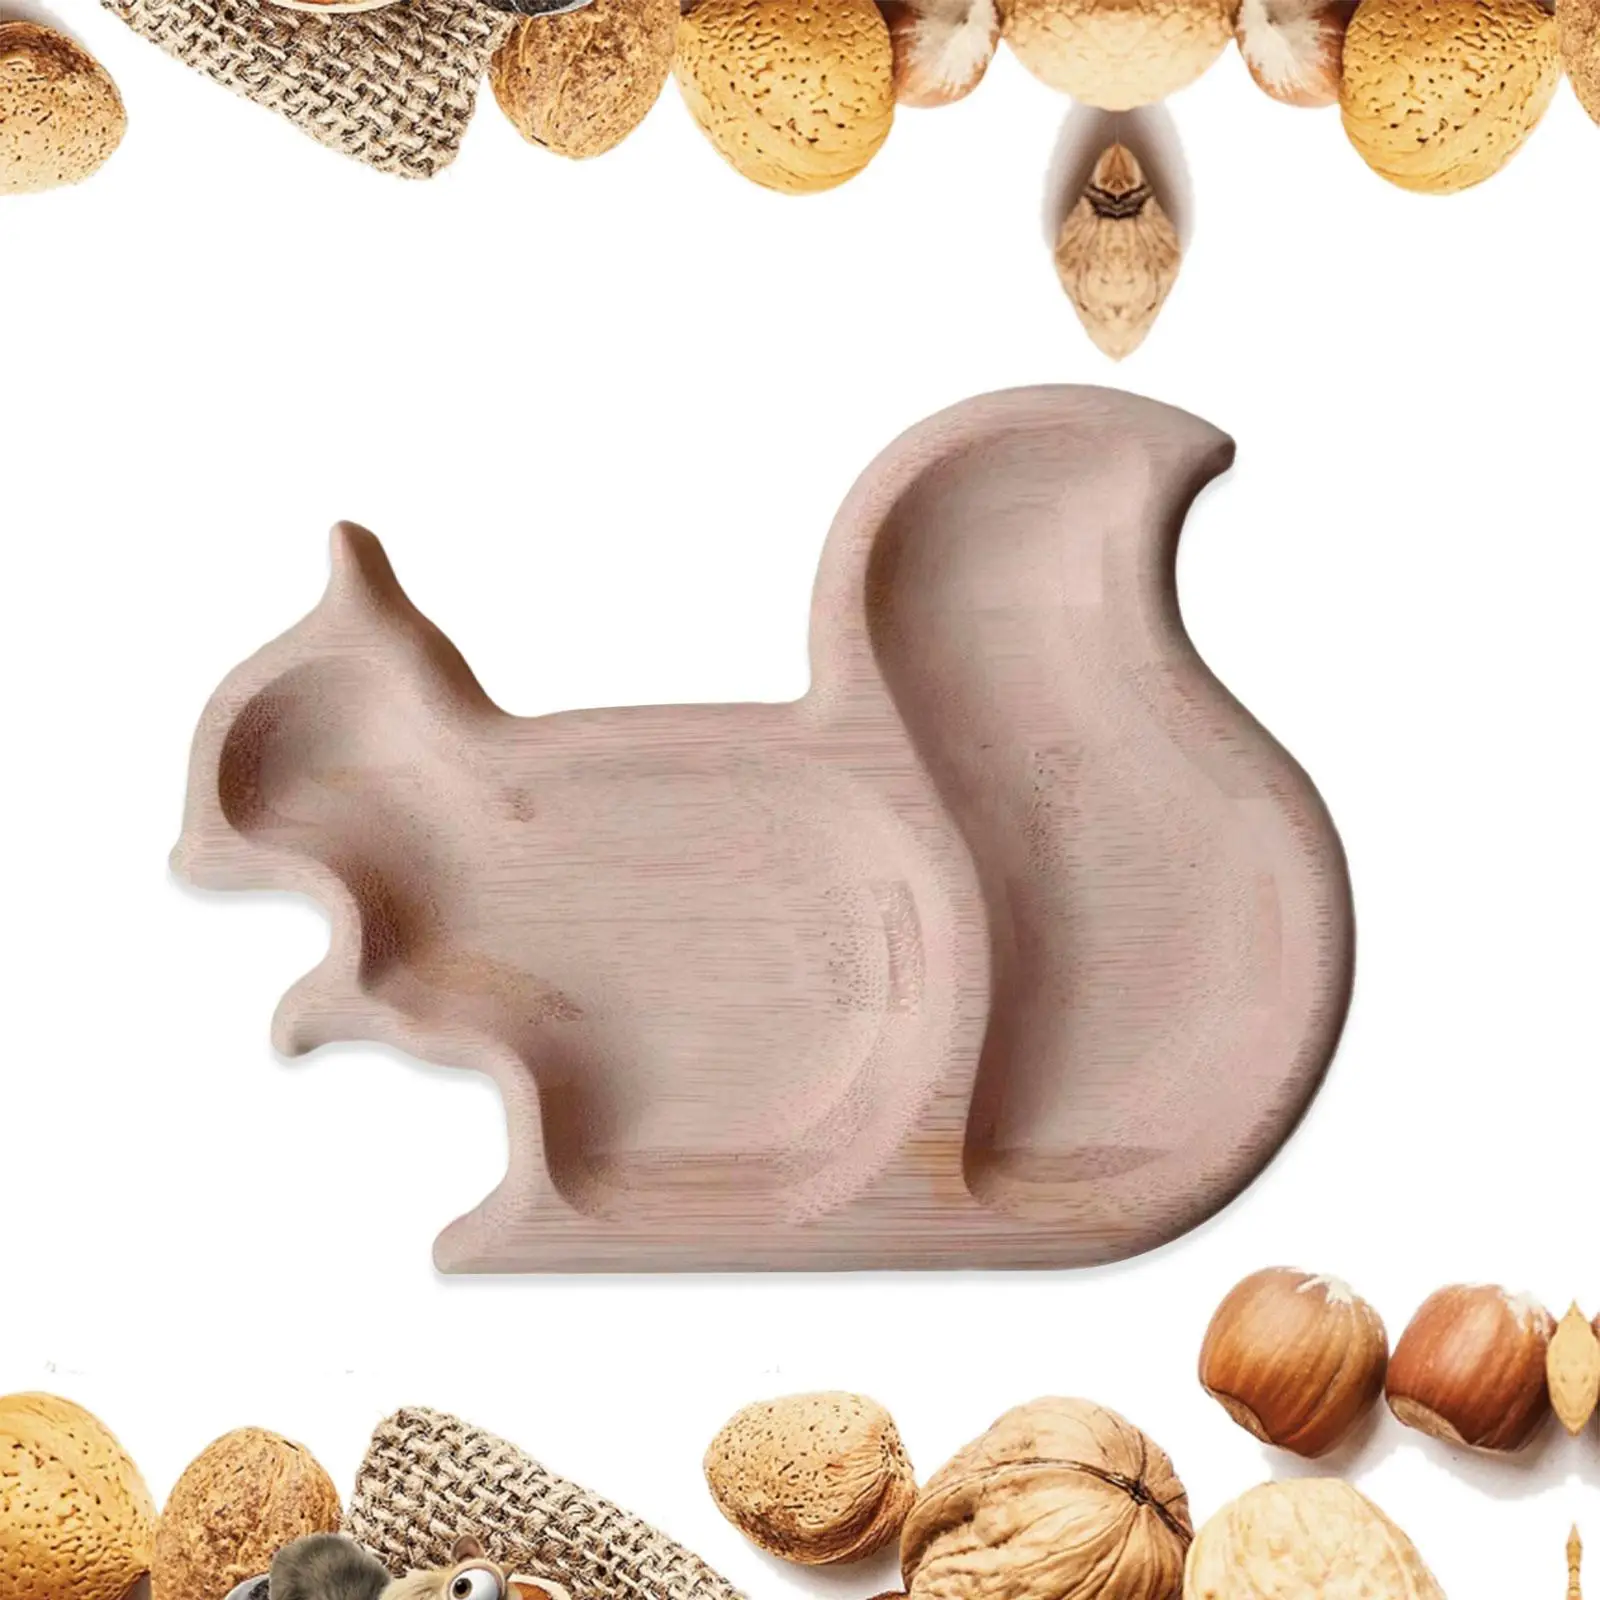 Squirrel Serving Dish Dessert Platter Tray Candy Dish Nut Bowl Wooden Serving Tray for Snack Goodies Fruit Candies Kitchen